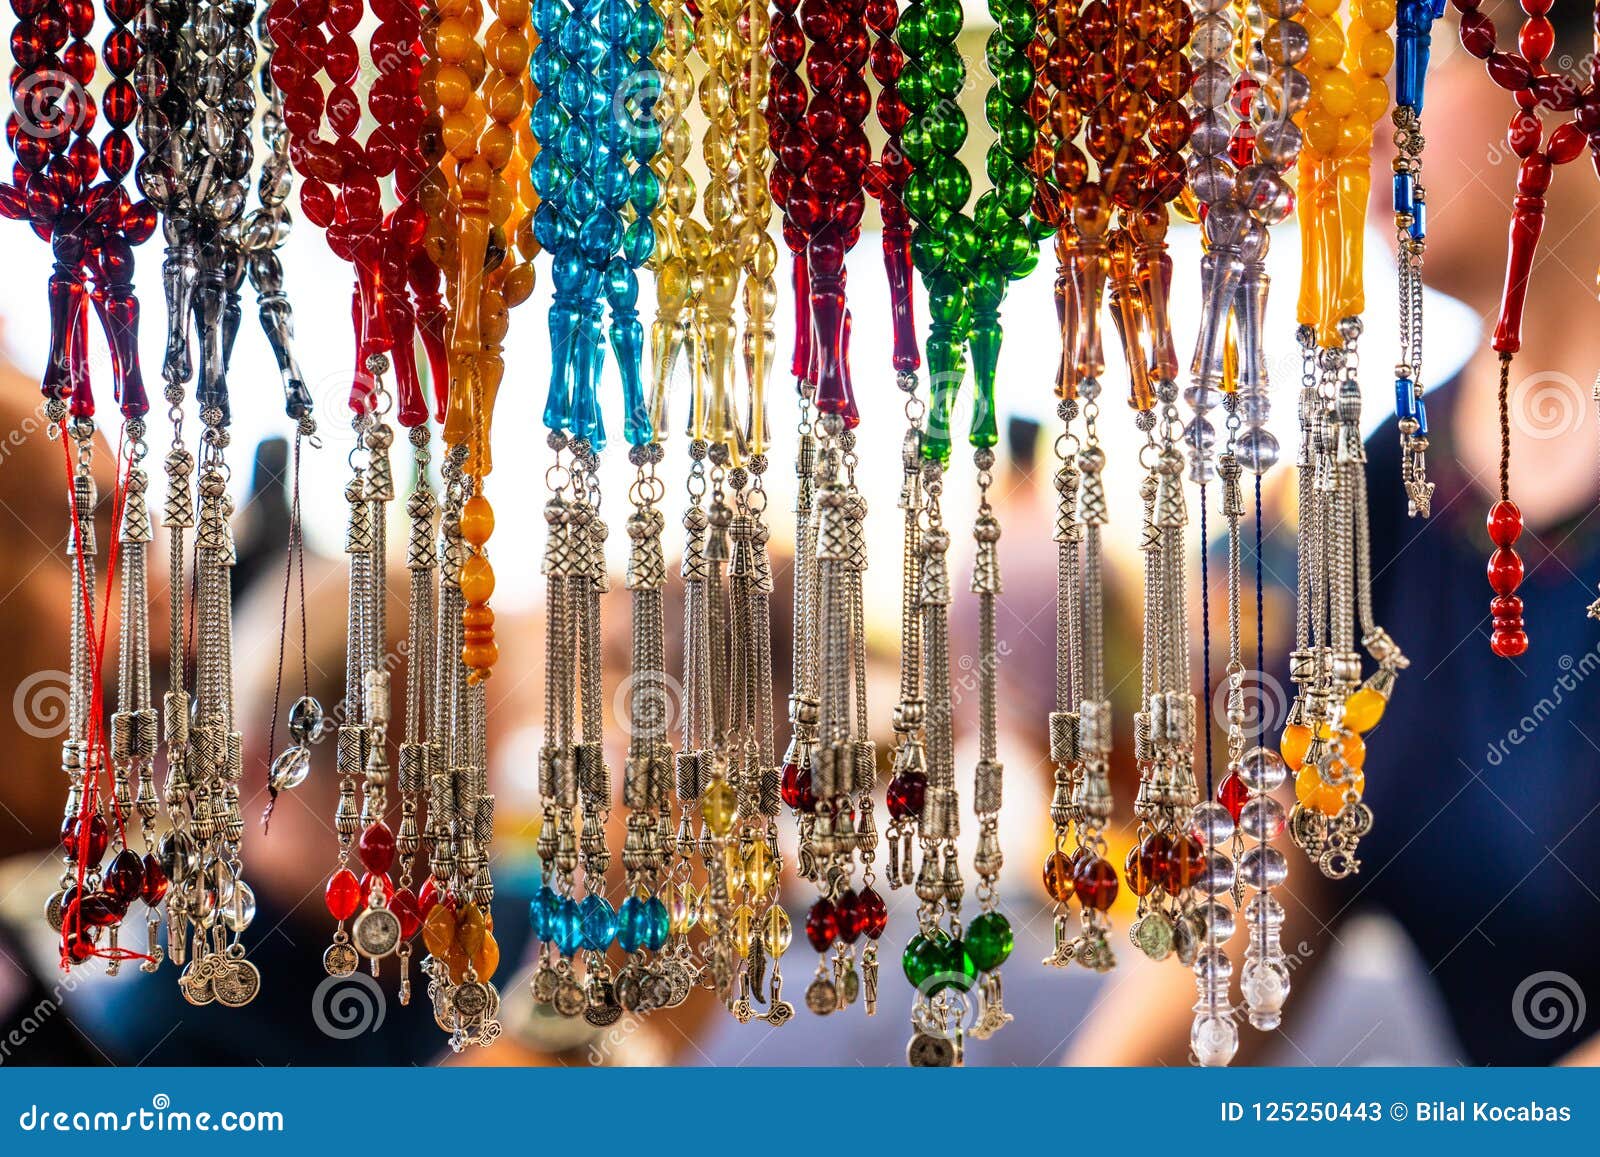 View of Tesbih and Beads Hanging in a Street Shop Stock Image - Image ...